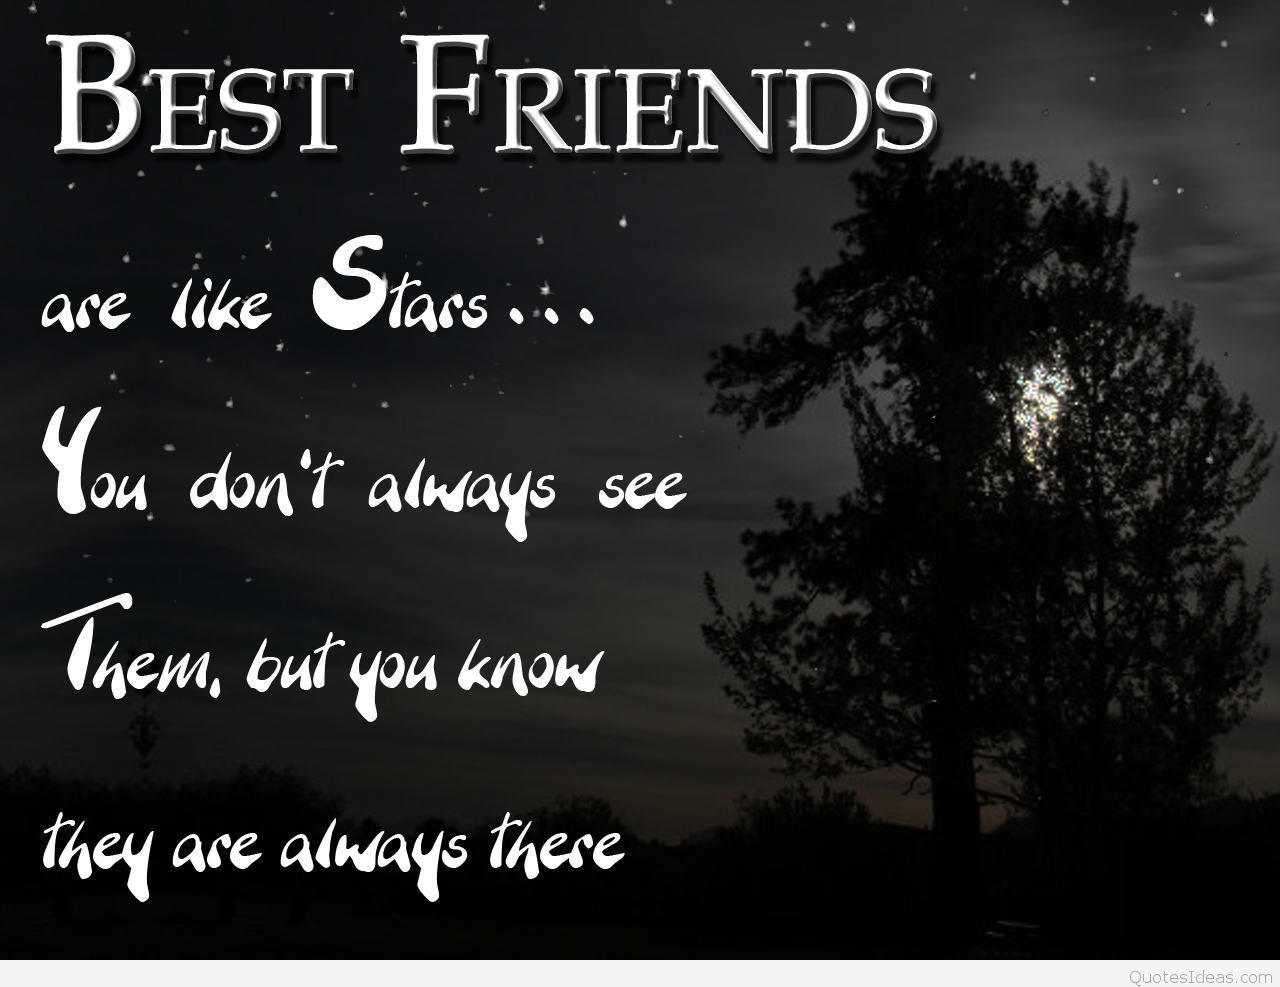 Best Friends Wallpaper With Quote